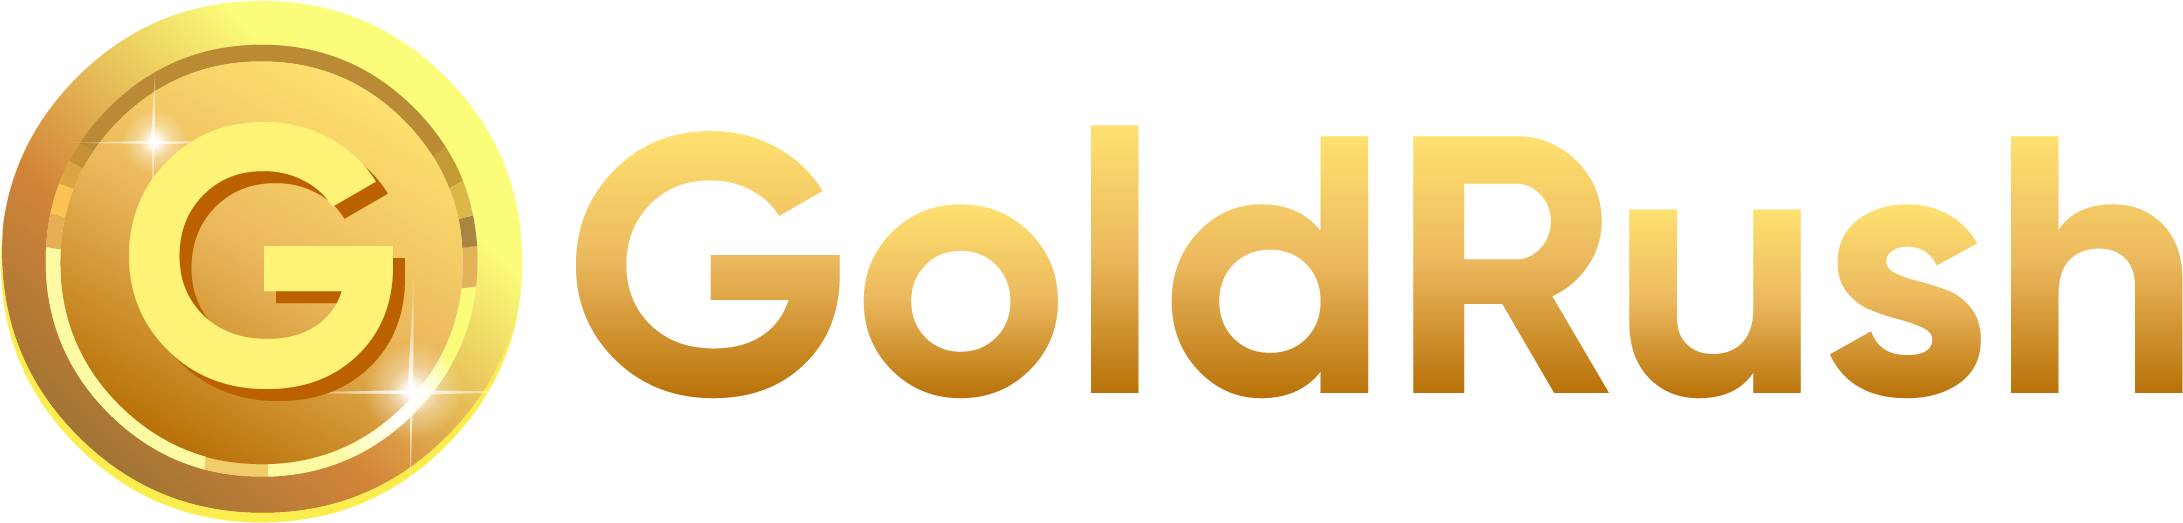 Gold Rush Global Group Pty Ltd Expands Online Trading Services Worldwide, Capturing Global Markets